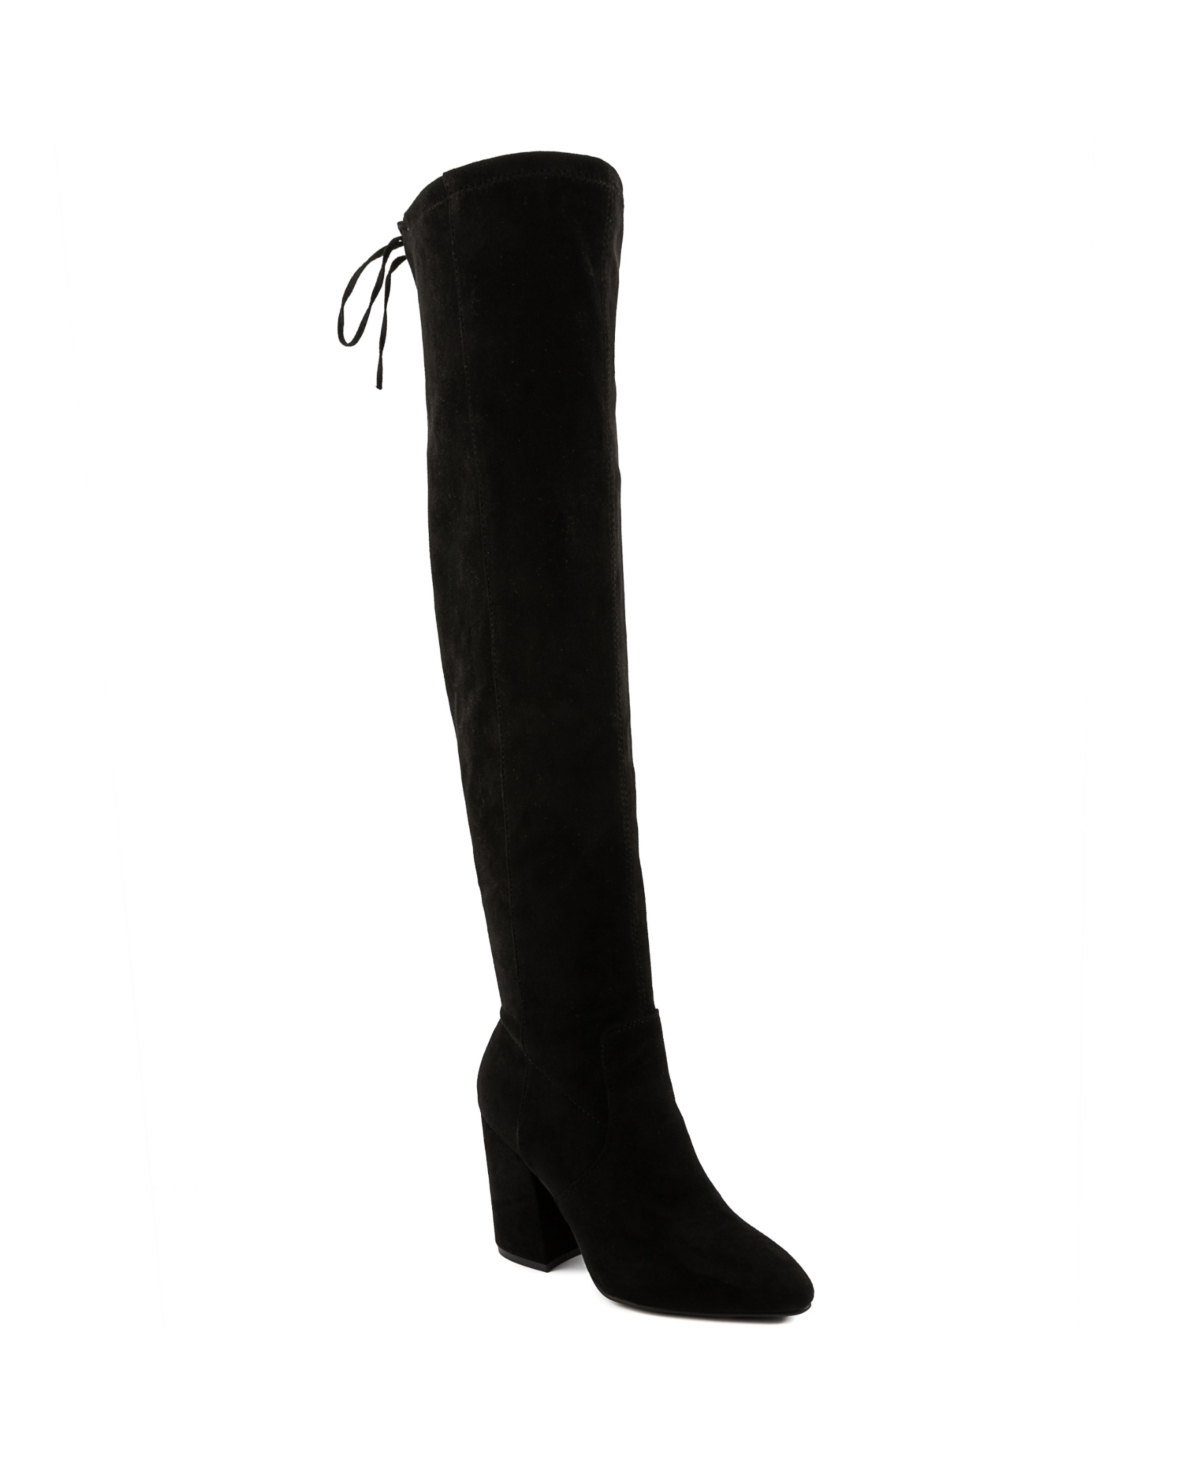 Women's Evers Over The Knee Boots - Black